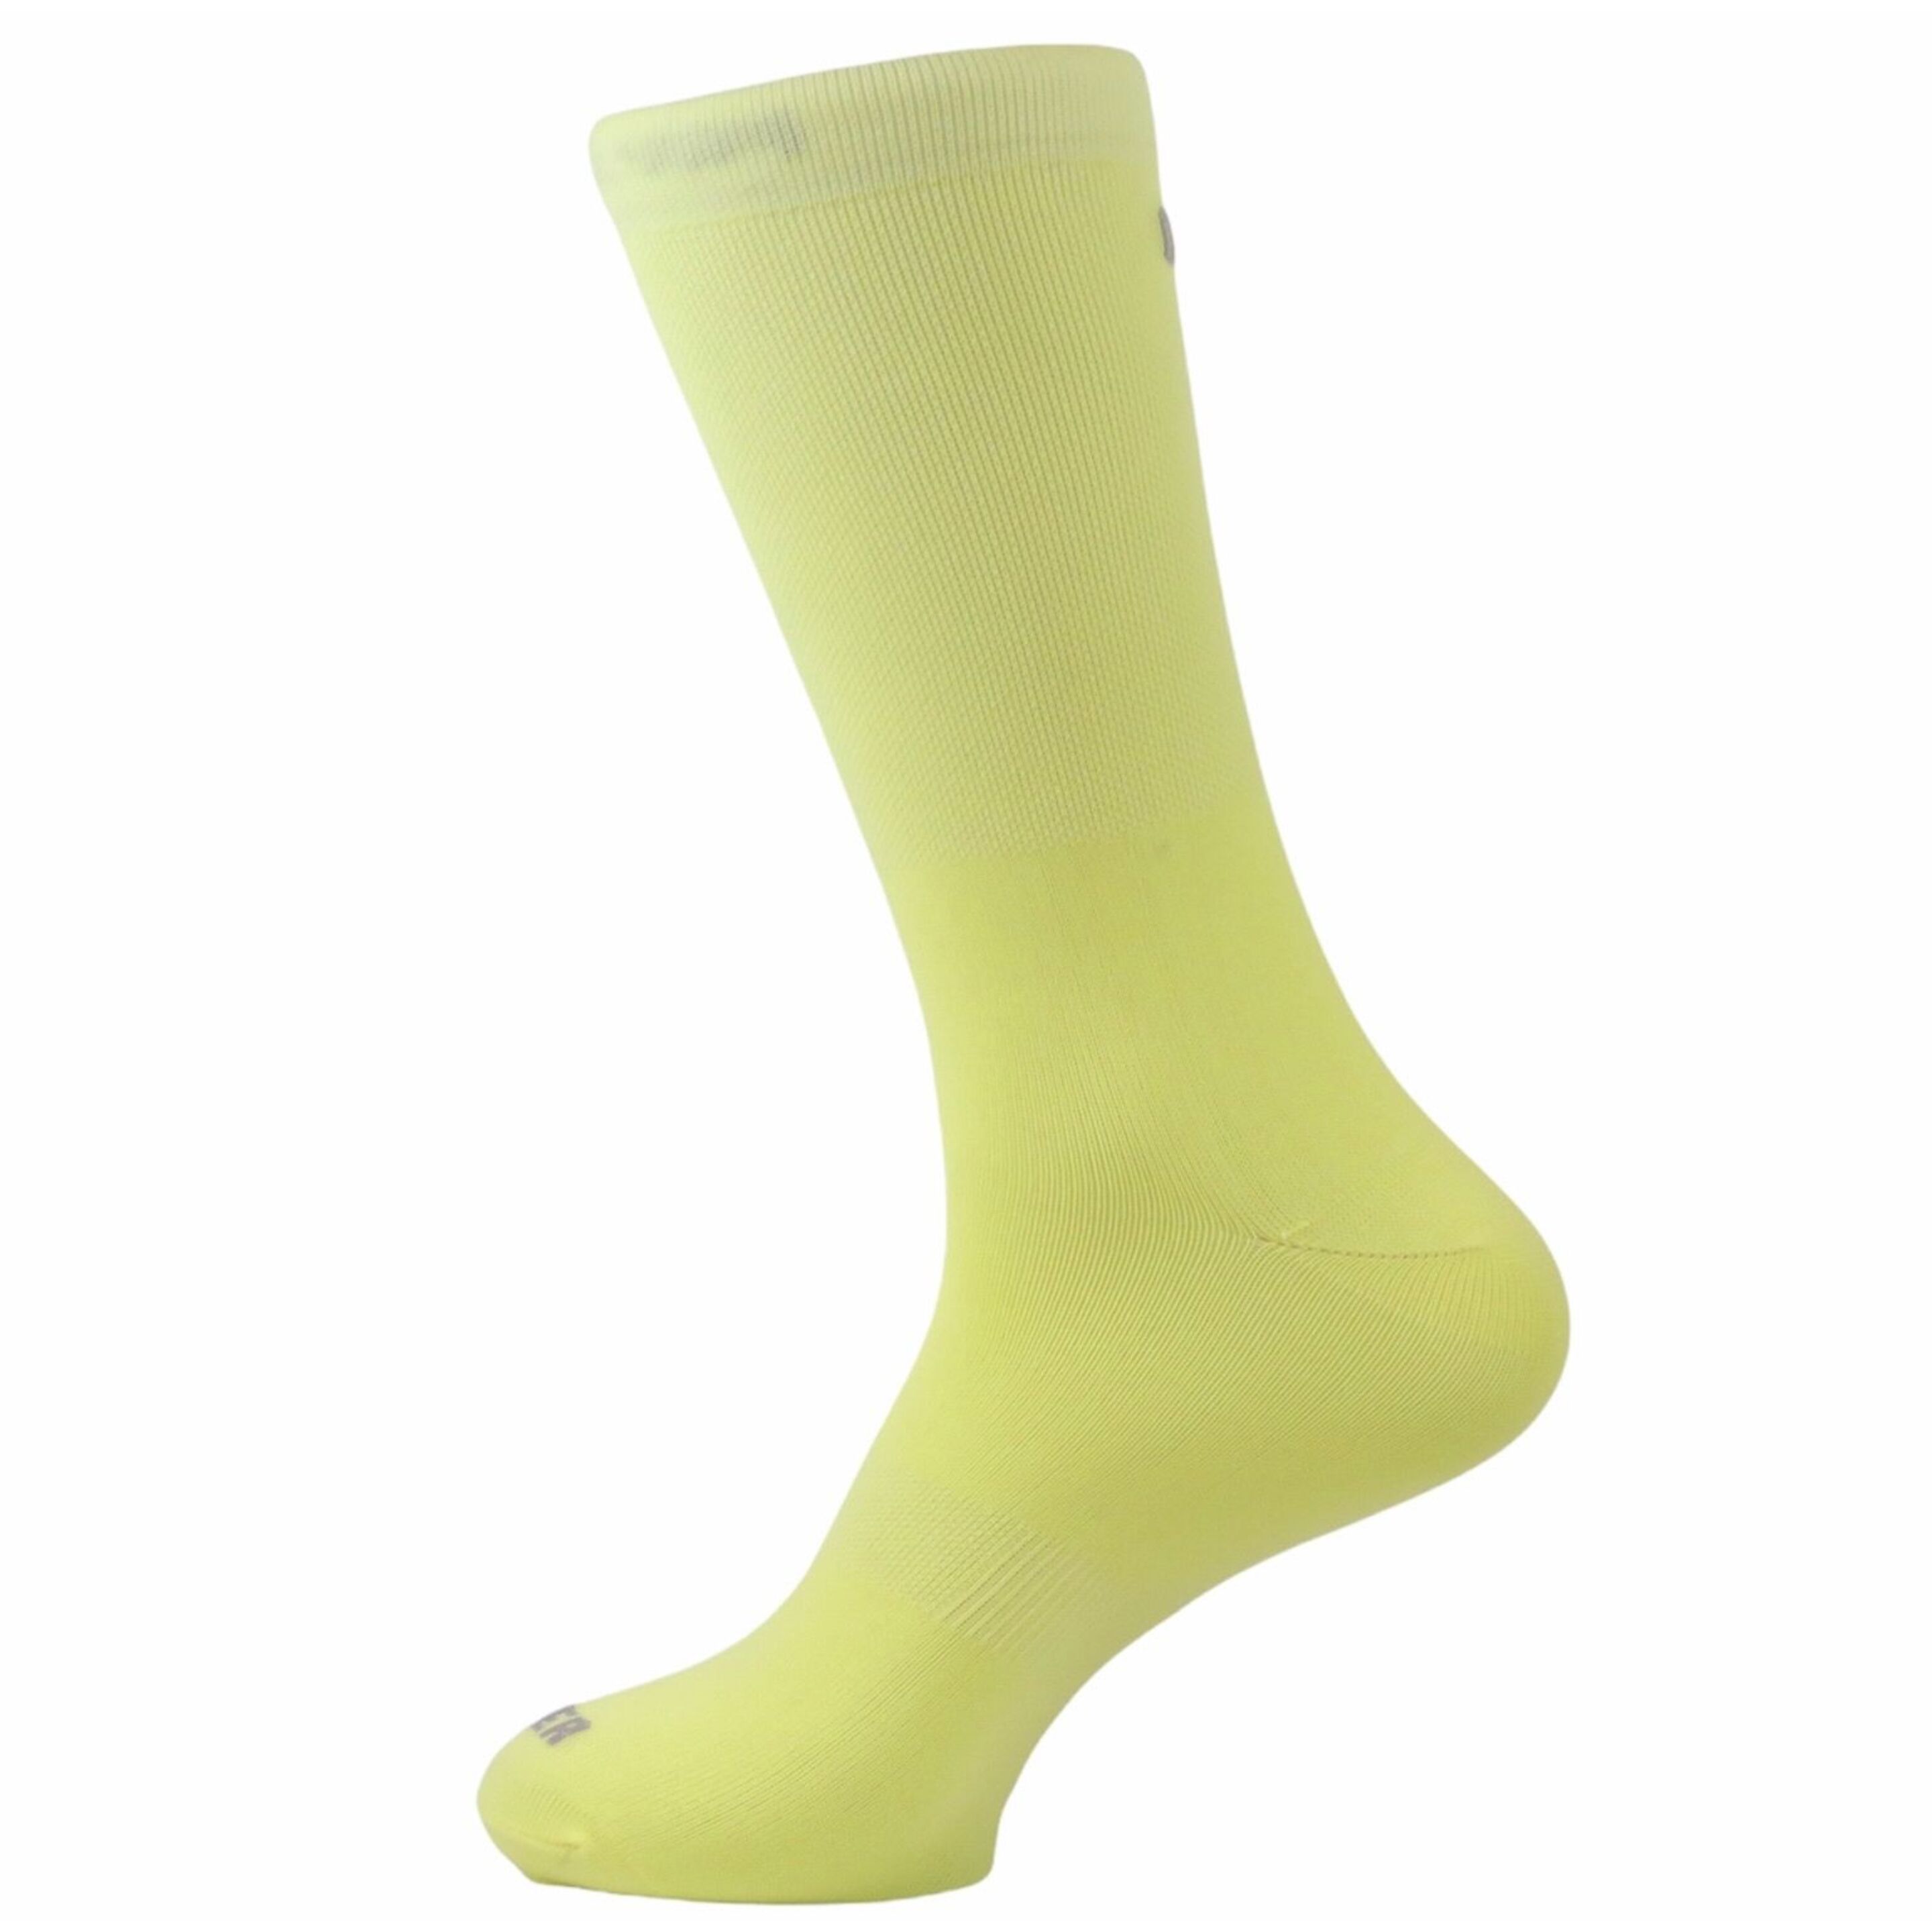 Calcetines Ciclismo Mooquer Classy Yellow - amarillo - 